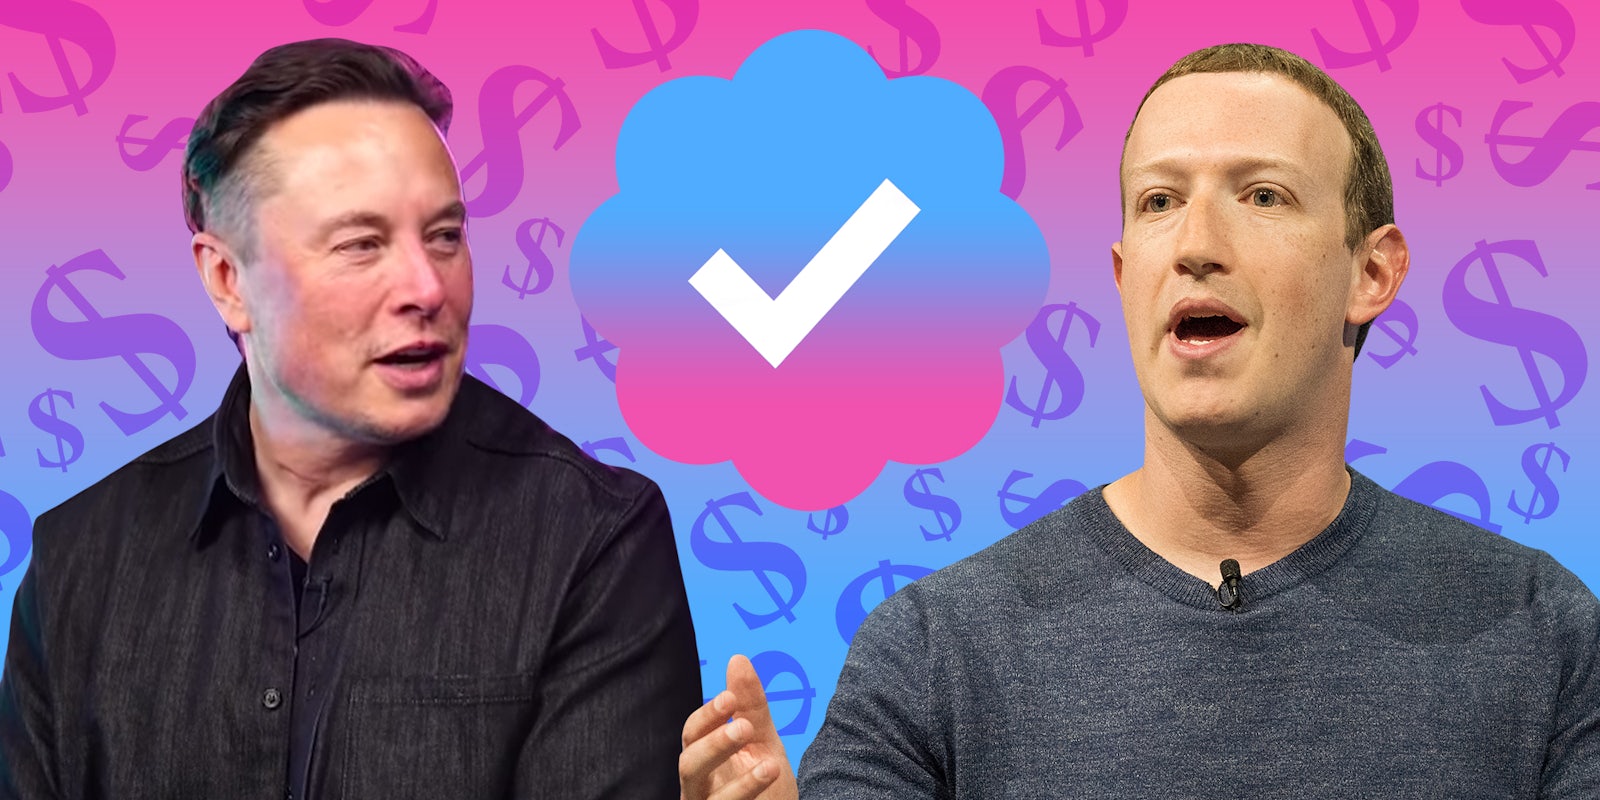 Elon Musk and Mark Zuckerberg in front of pink to blue gradient dollar sign background with Twitter verified logo in center